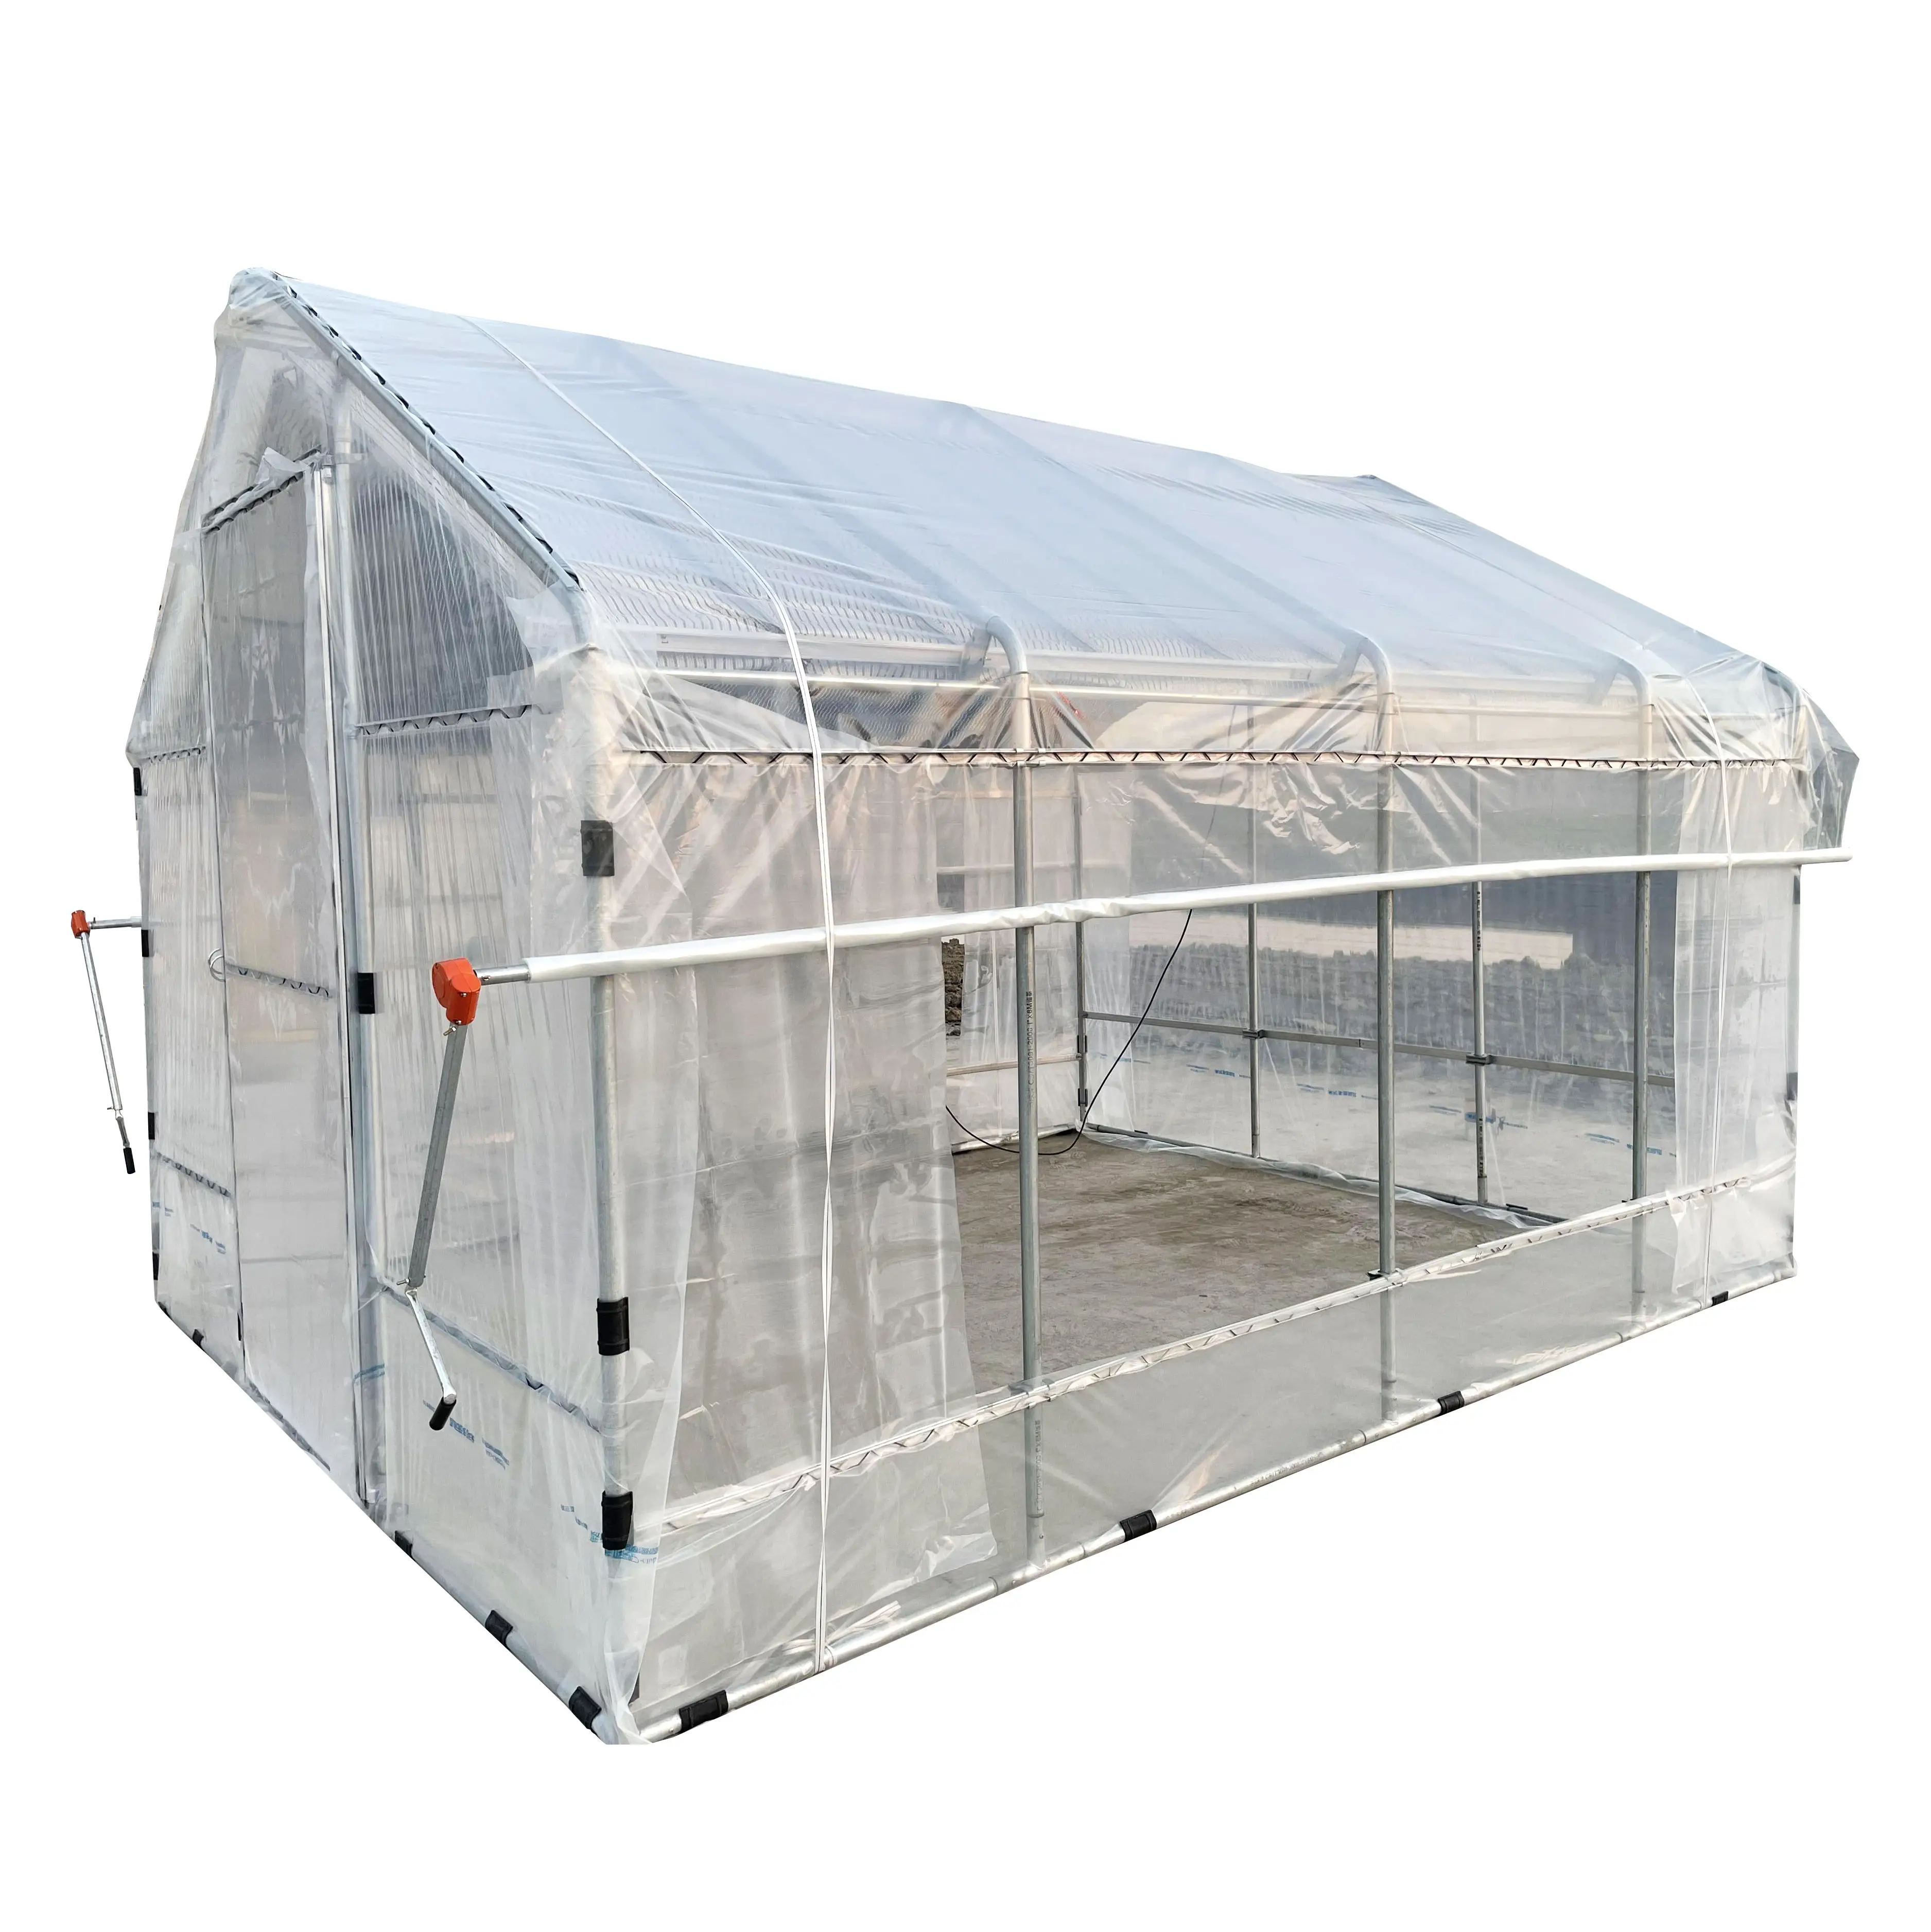 Agriculture greenhouse /poly garden green house/ tunnel greenhouse with auto shading system